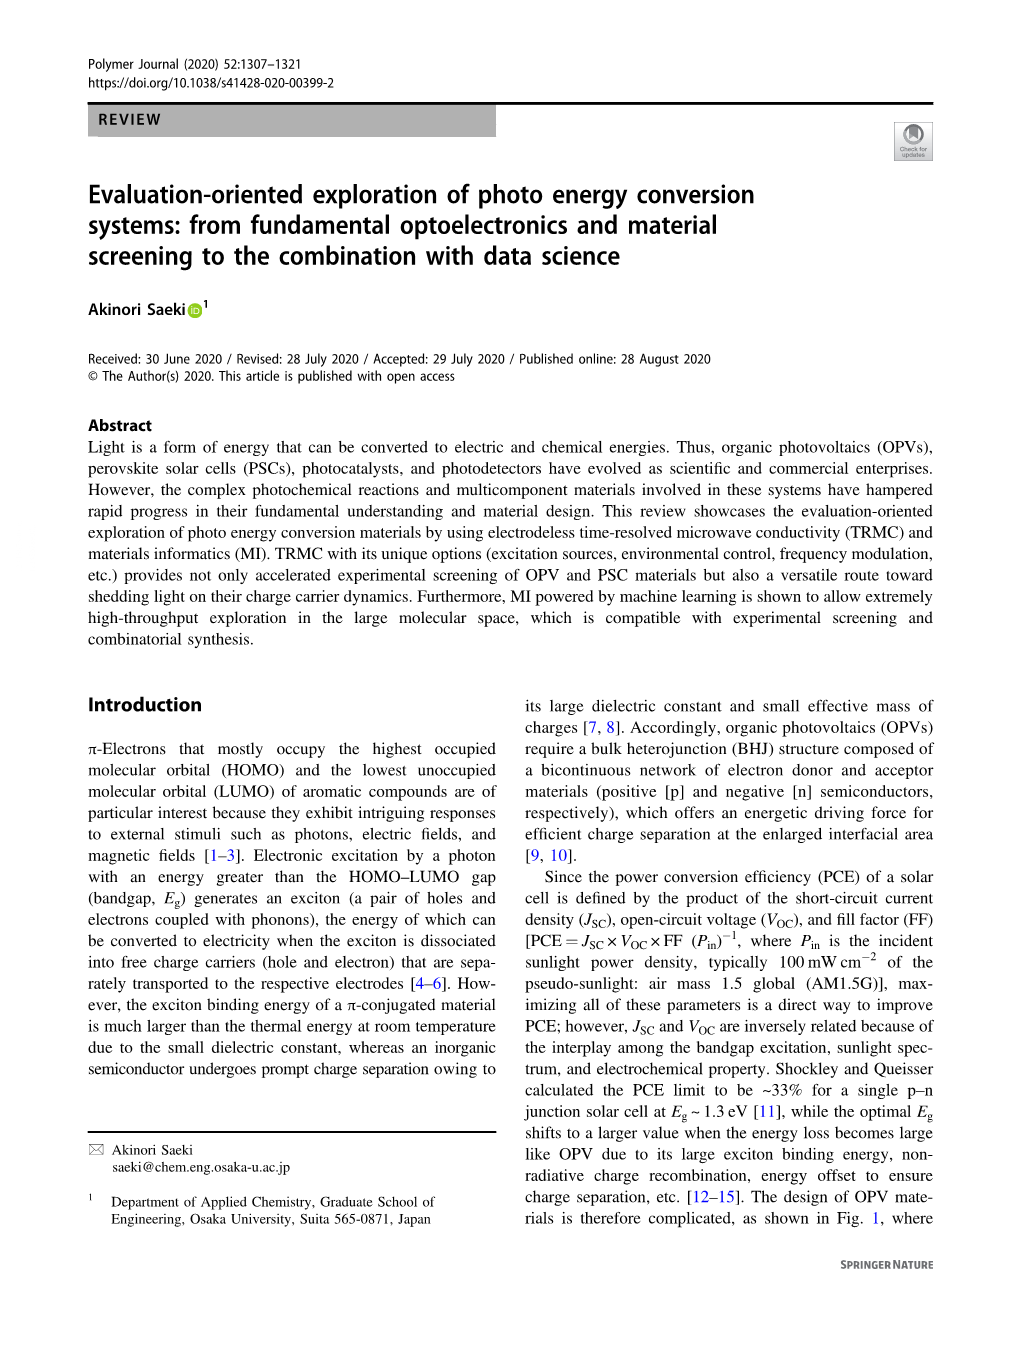 Evaluation-Oriented Exploration of Photo Energy Conversion Systems: from Fundamental Optoelectronics and Material Screening to the Combination with Data Science